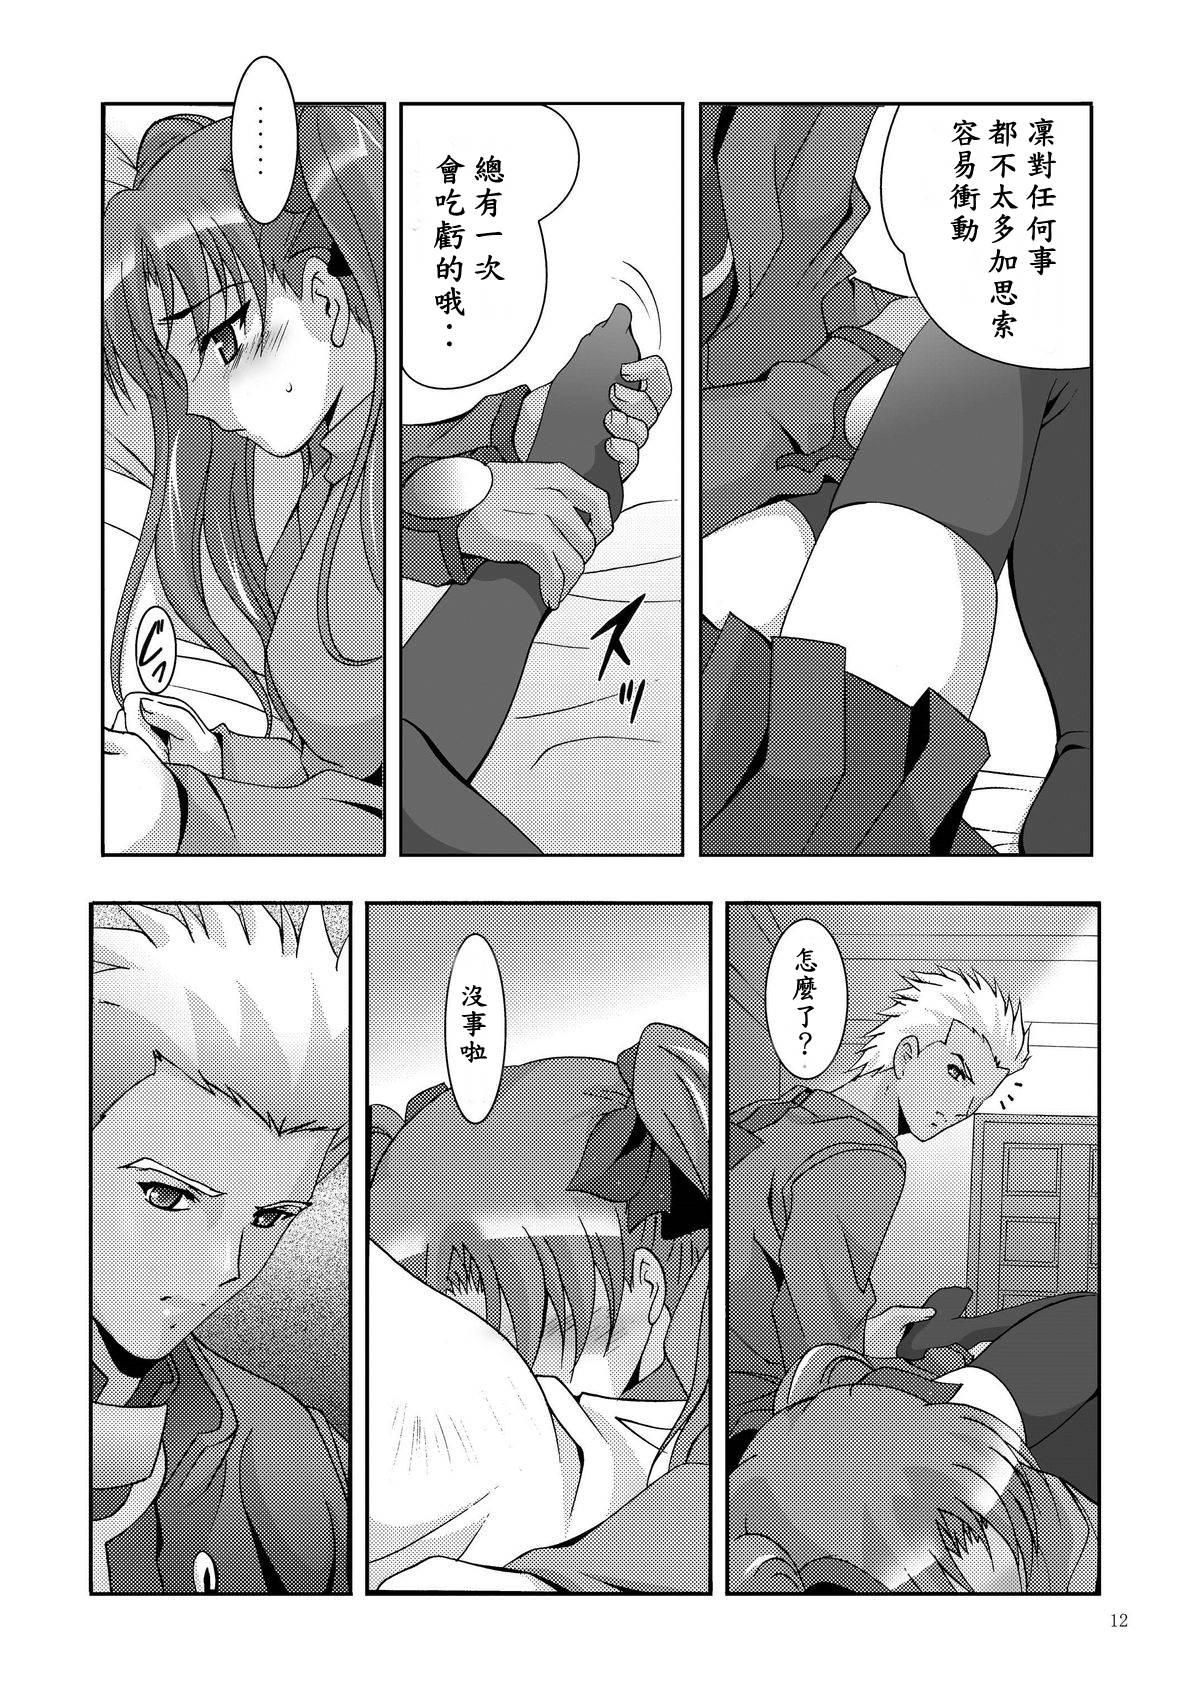 Behind MOUSOU THEATER 19 - Fate stay night Squirt - Page 10